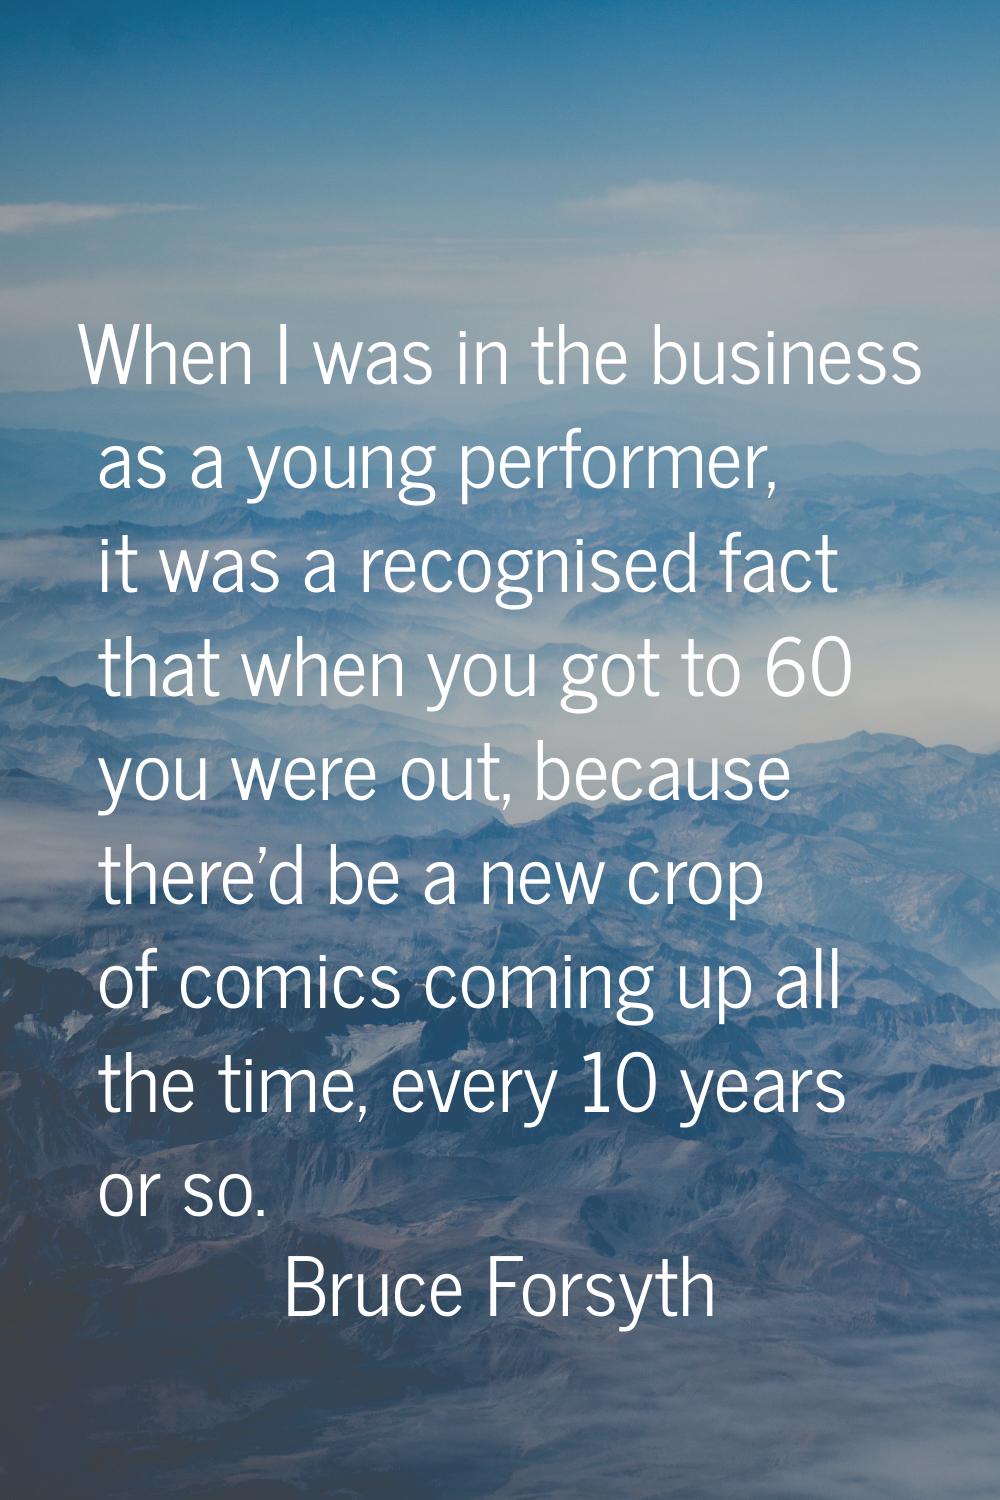 When I was in the business as a young performer, it was a recognised fact that when you got to 60 y